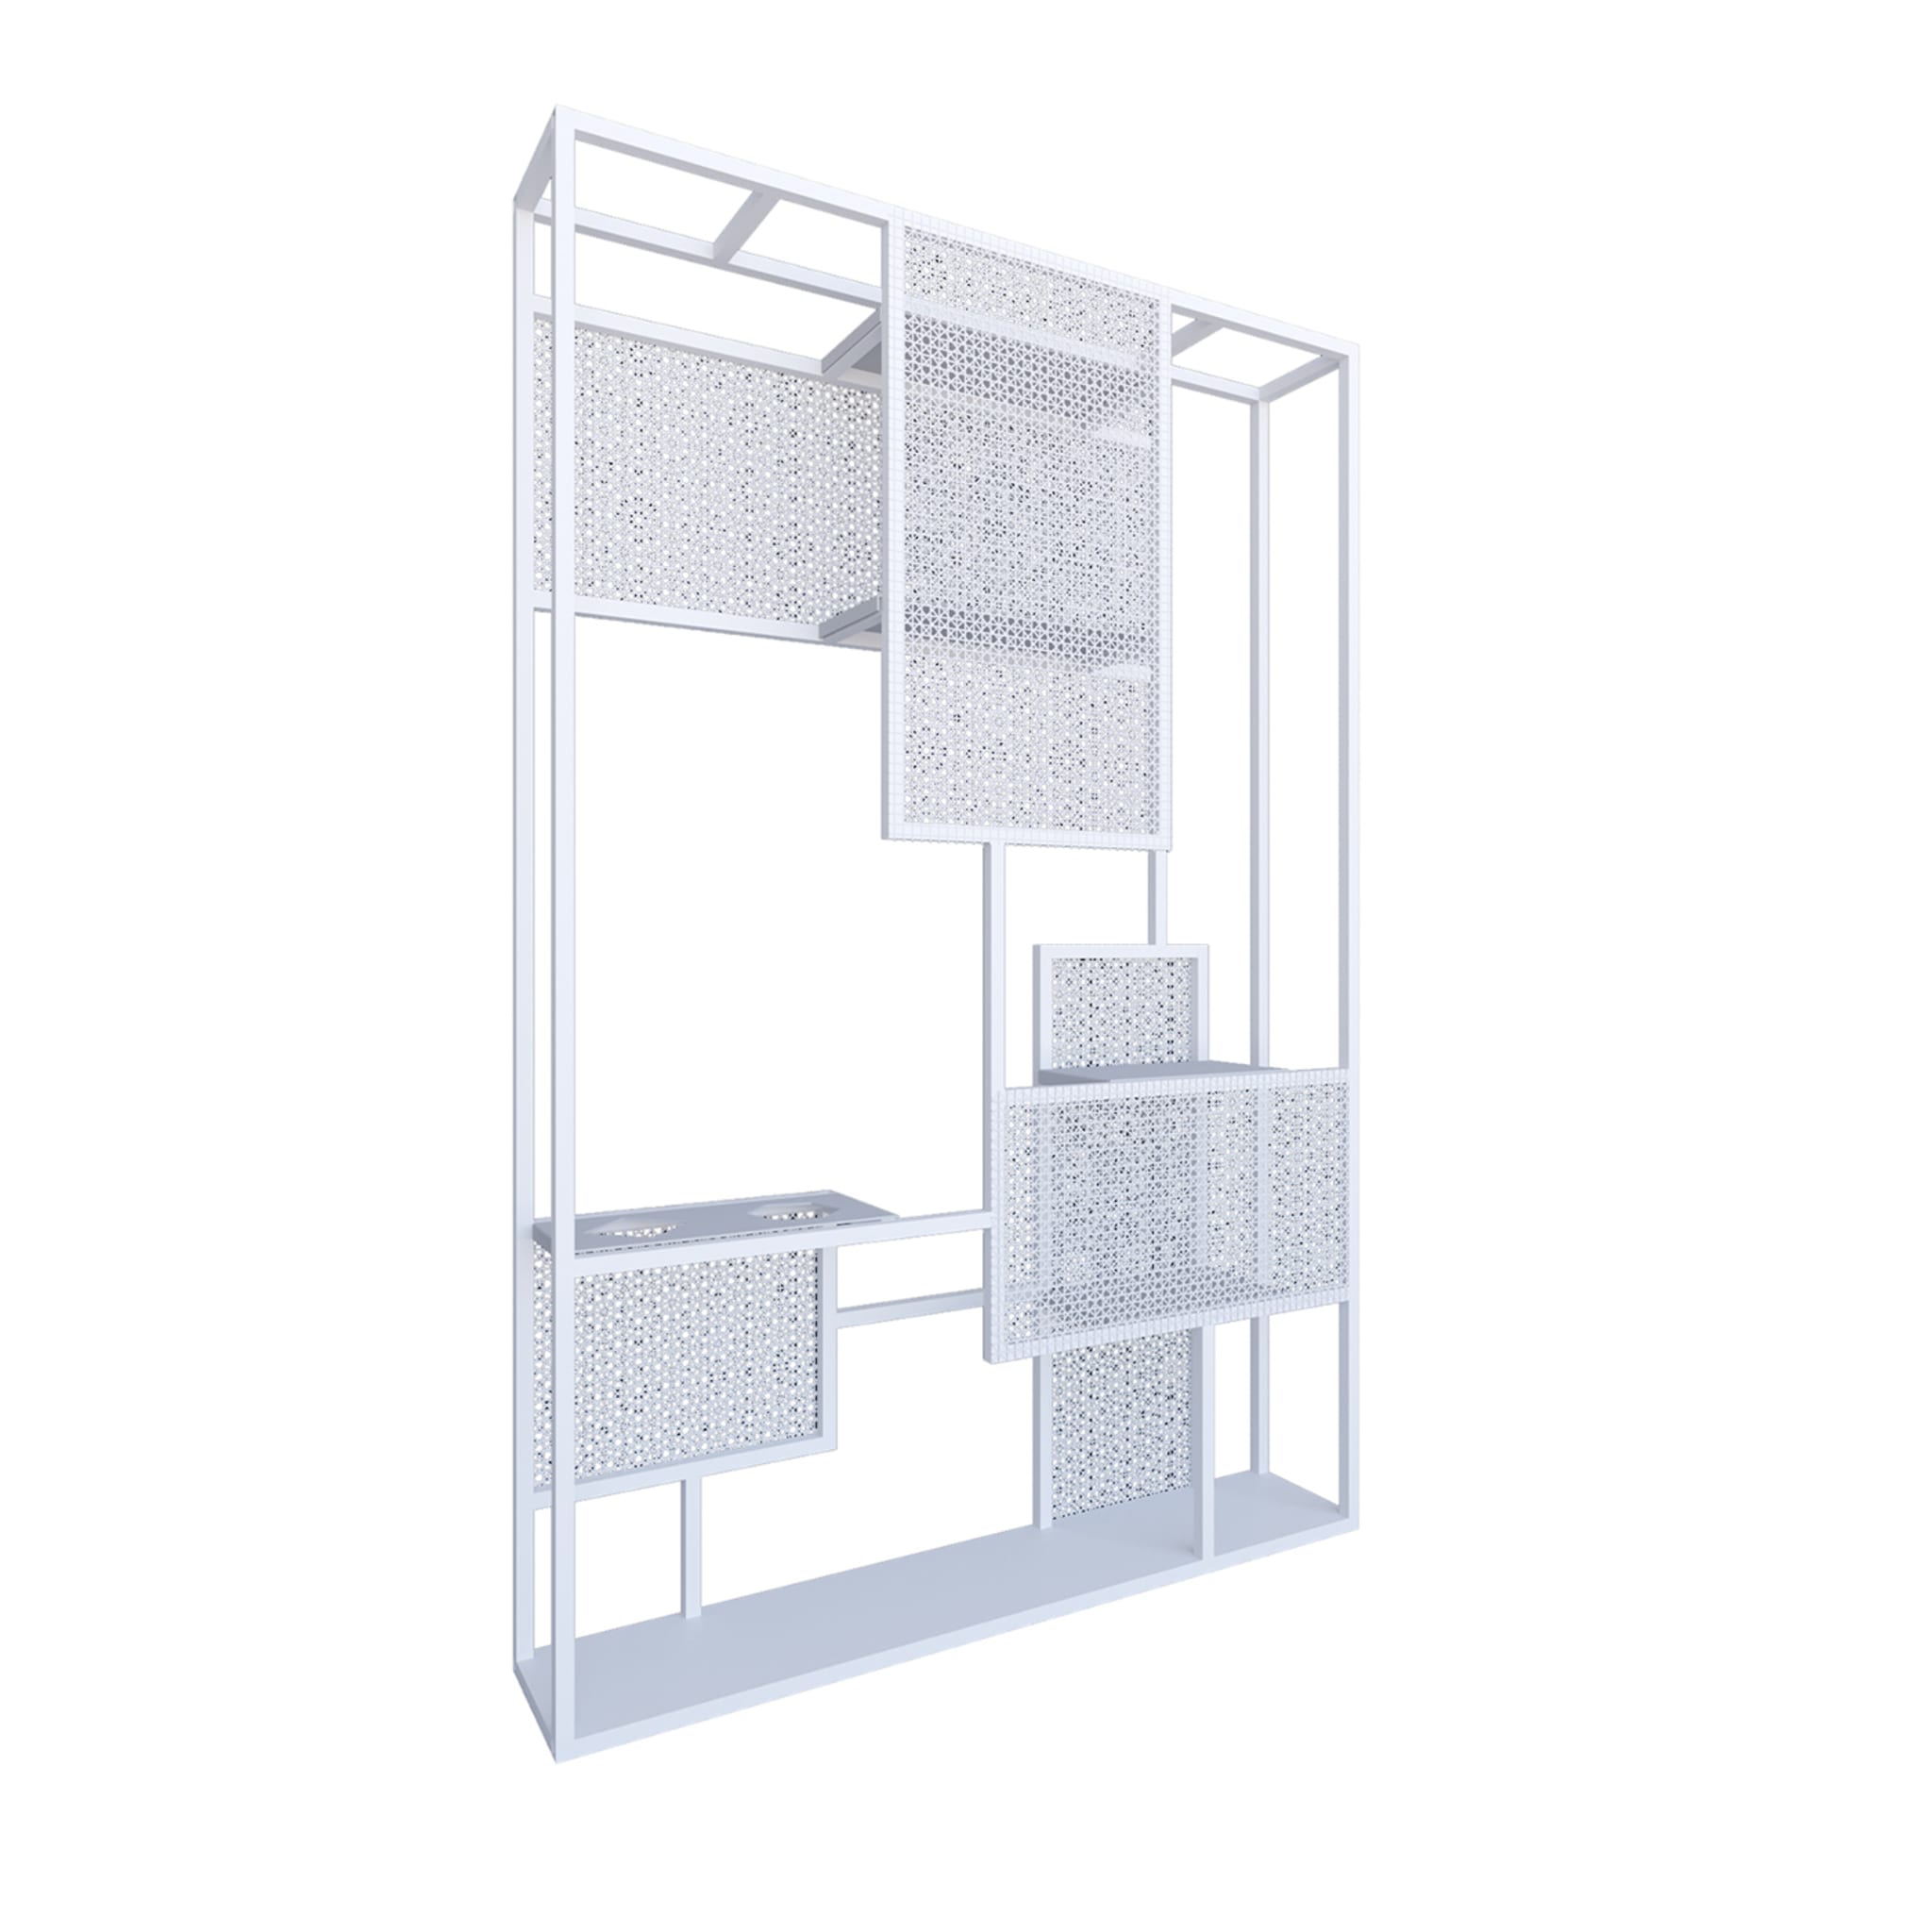 Aria Bookcase / Space divider - Main view